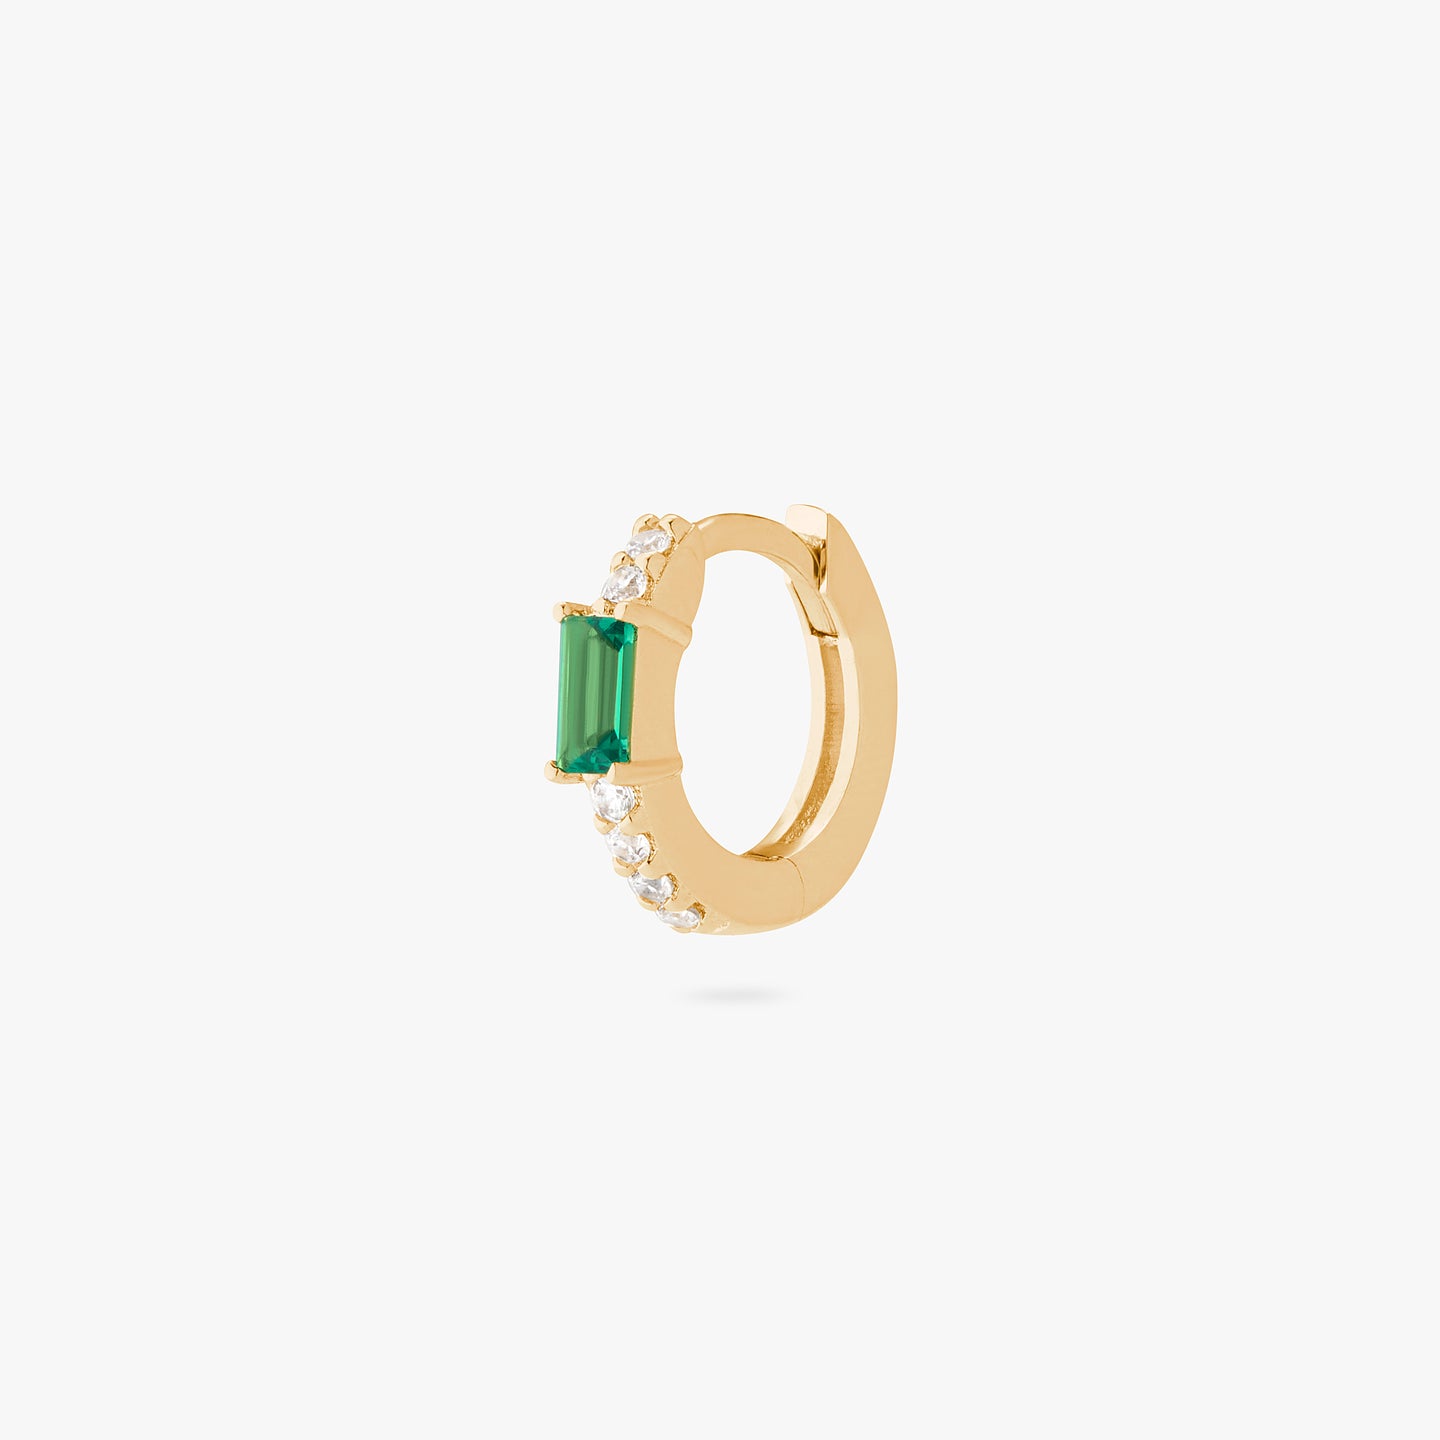 An image of a gold/clear huggie with a green accent baguette CZ stone. color:null|gold/green